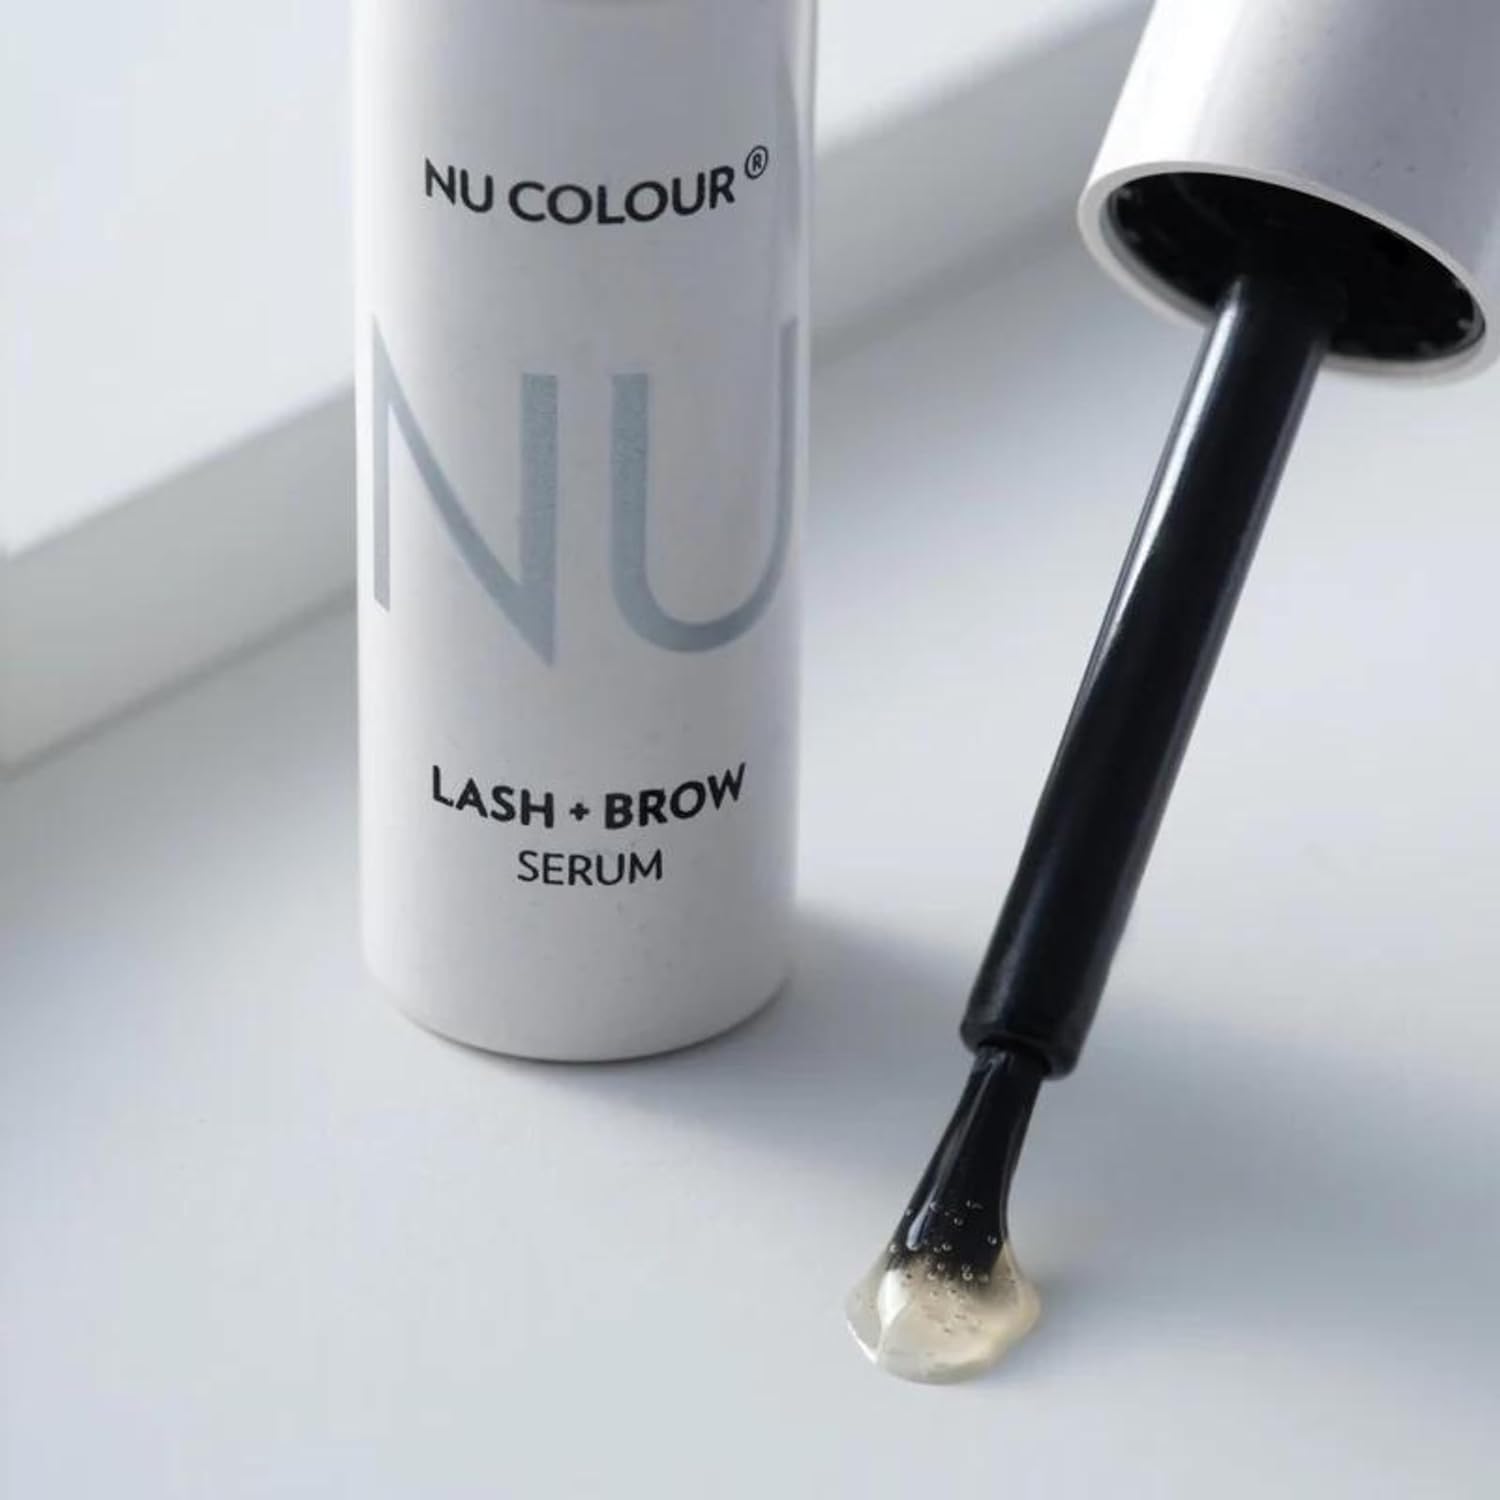 Nu Skin- Nu Colour Lash + Brow Serum | Brow a and Lash Care Serum, Clean Formula | Longer, Thicker, and Fuller Lashes and Brows |Brow and Lash Enhancement, Morning and Evening Application (5 ml) : Beauty & Personal Care